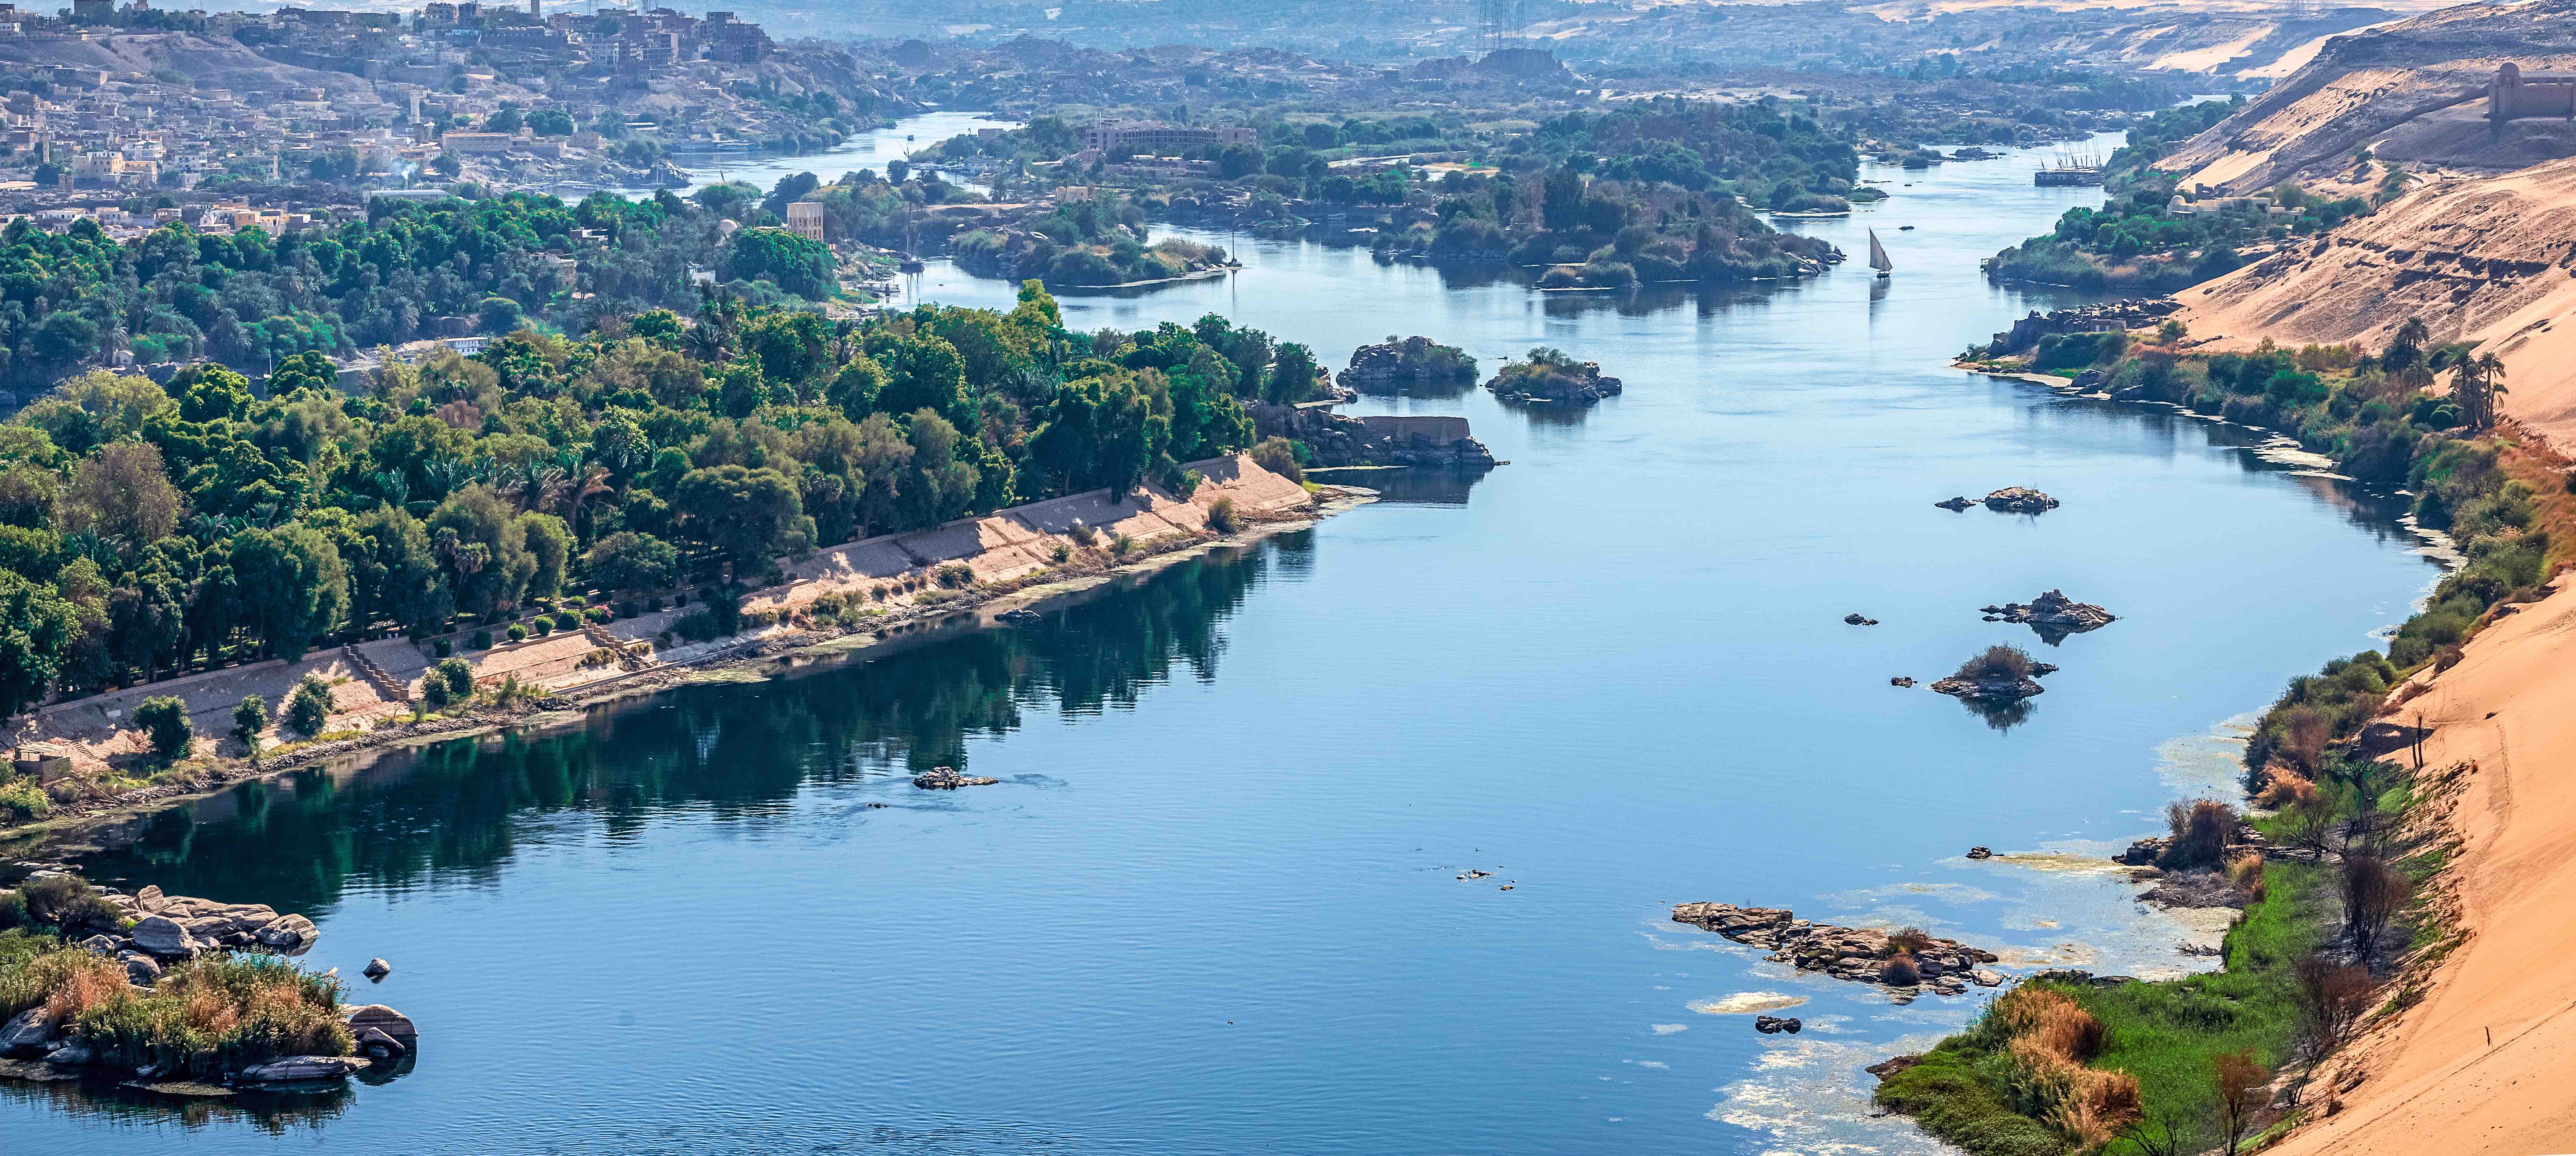 40 Nile River Facts About The Great River of Africa 